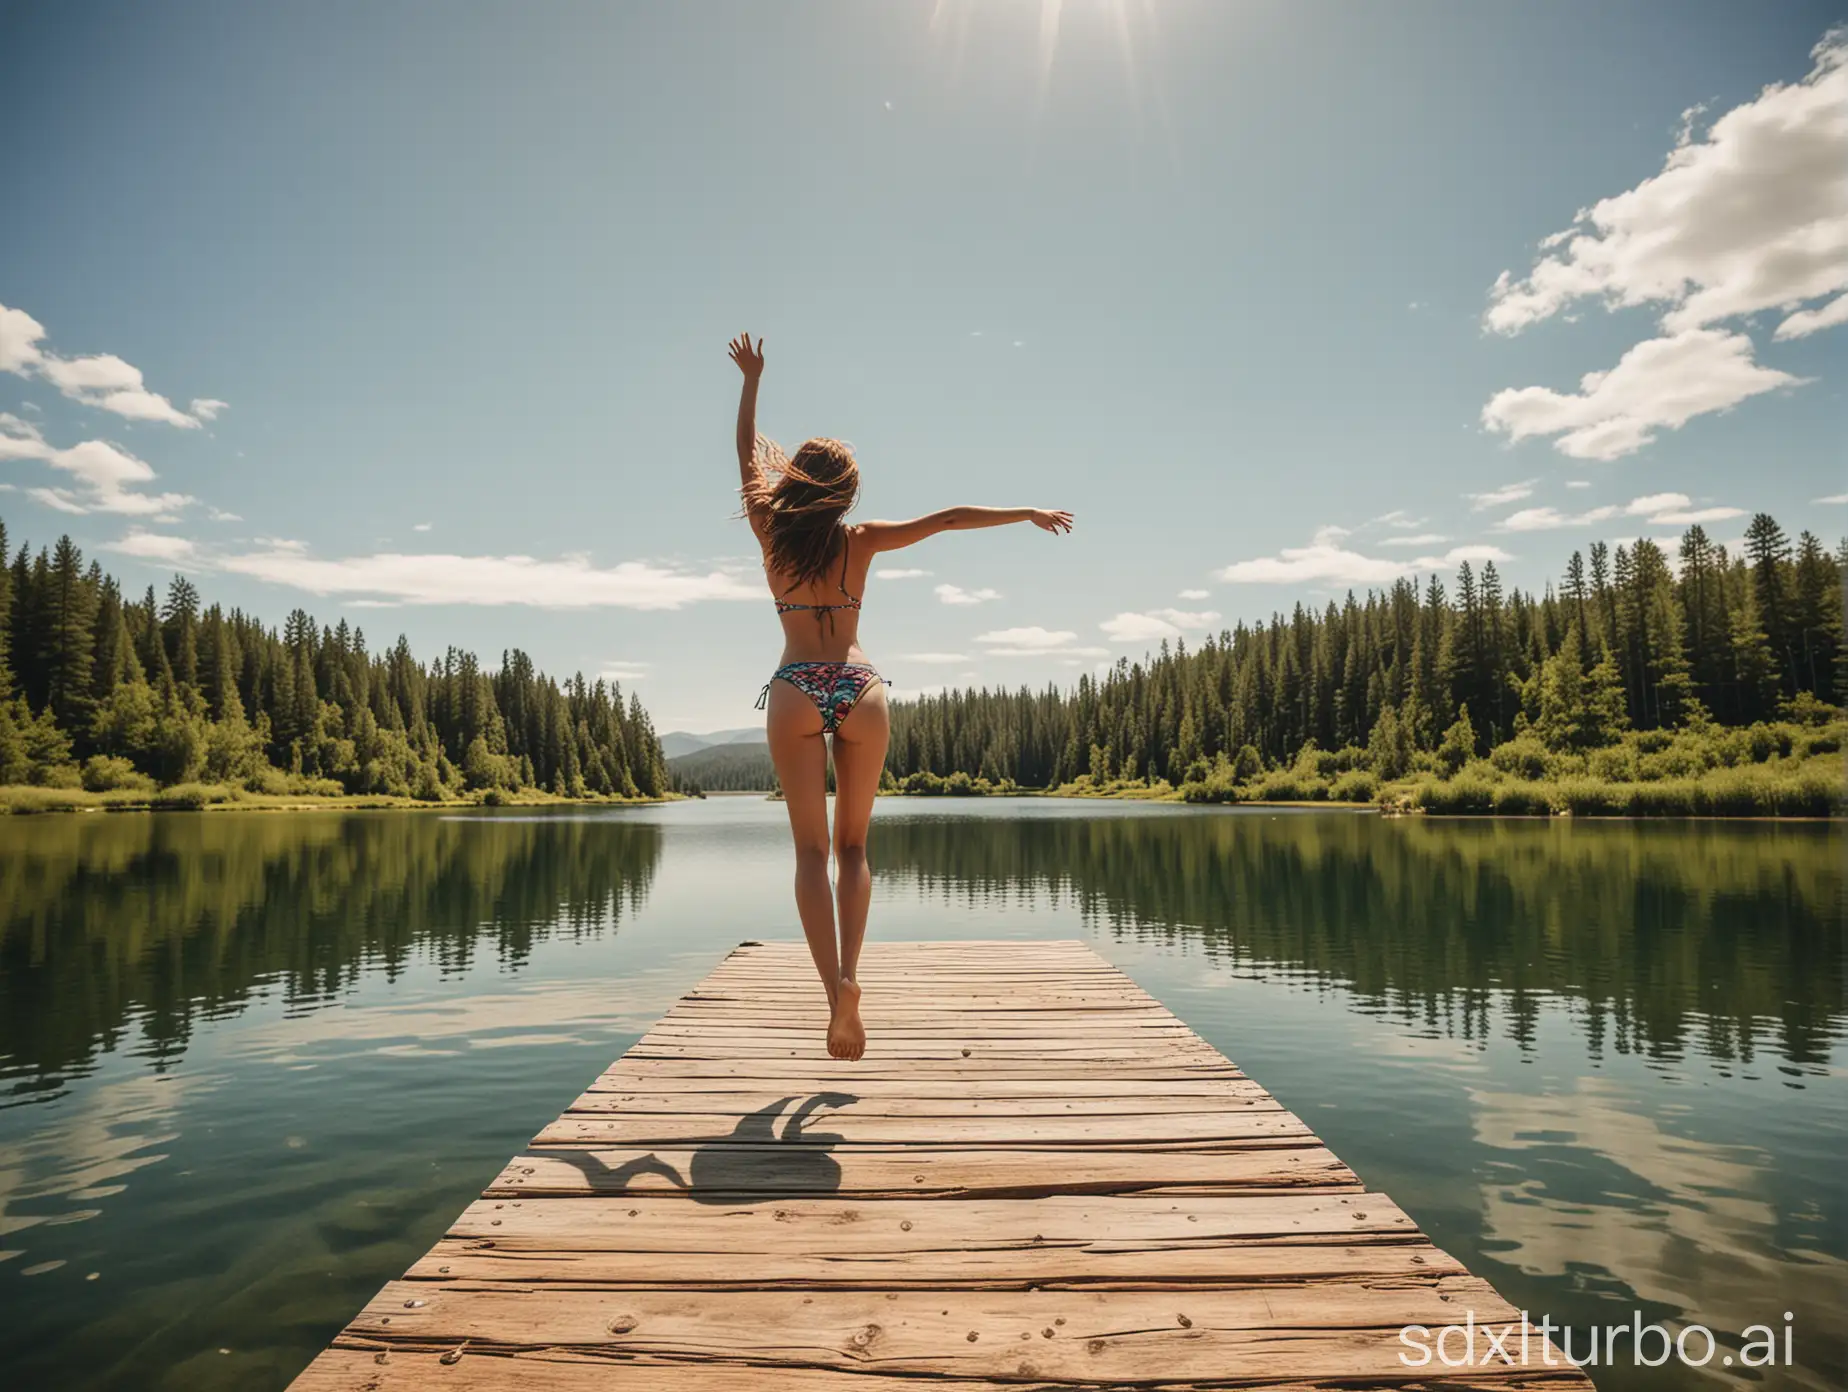 Create a photograph of a female model in a bikini,  jumping off the end of a wooden dock, into a lake in a beautiful American landscape. Lifestyle photography. Wide angle lens.